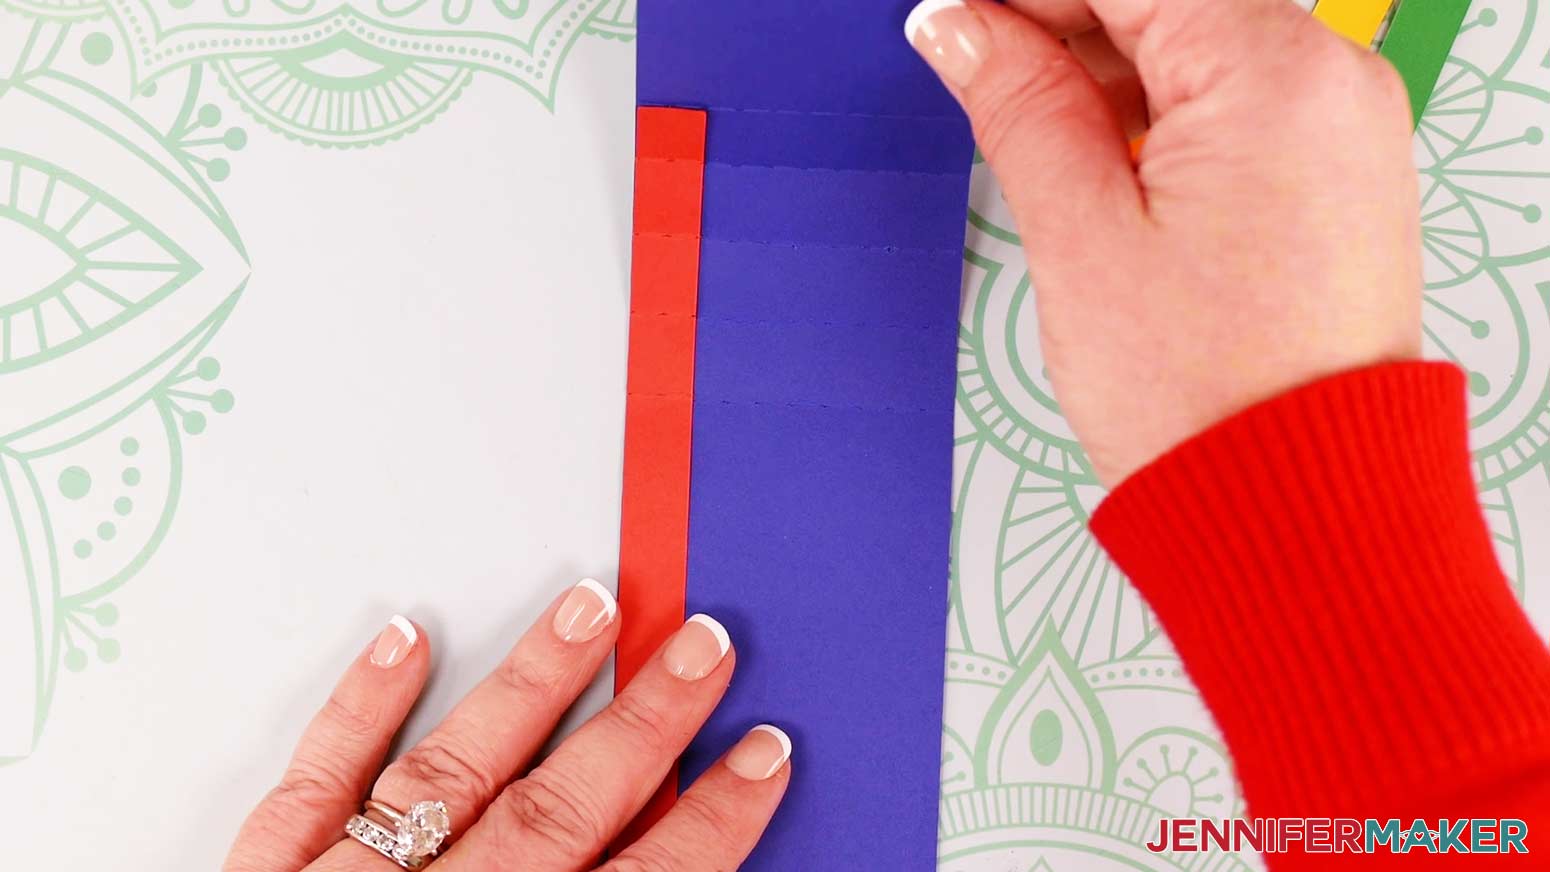 When the waterfall card's red rainbow stripe is attached to the slider piece correctly, the fold lines will match up.